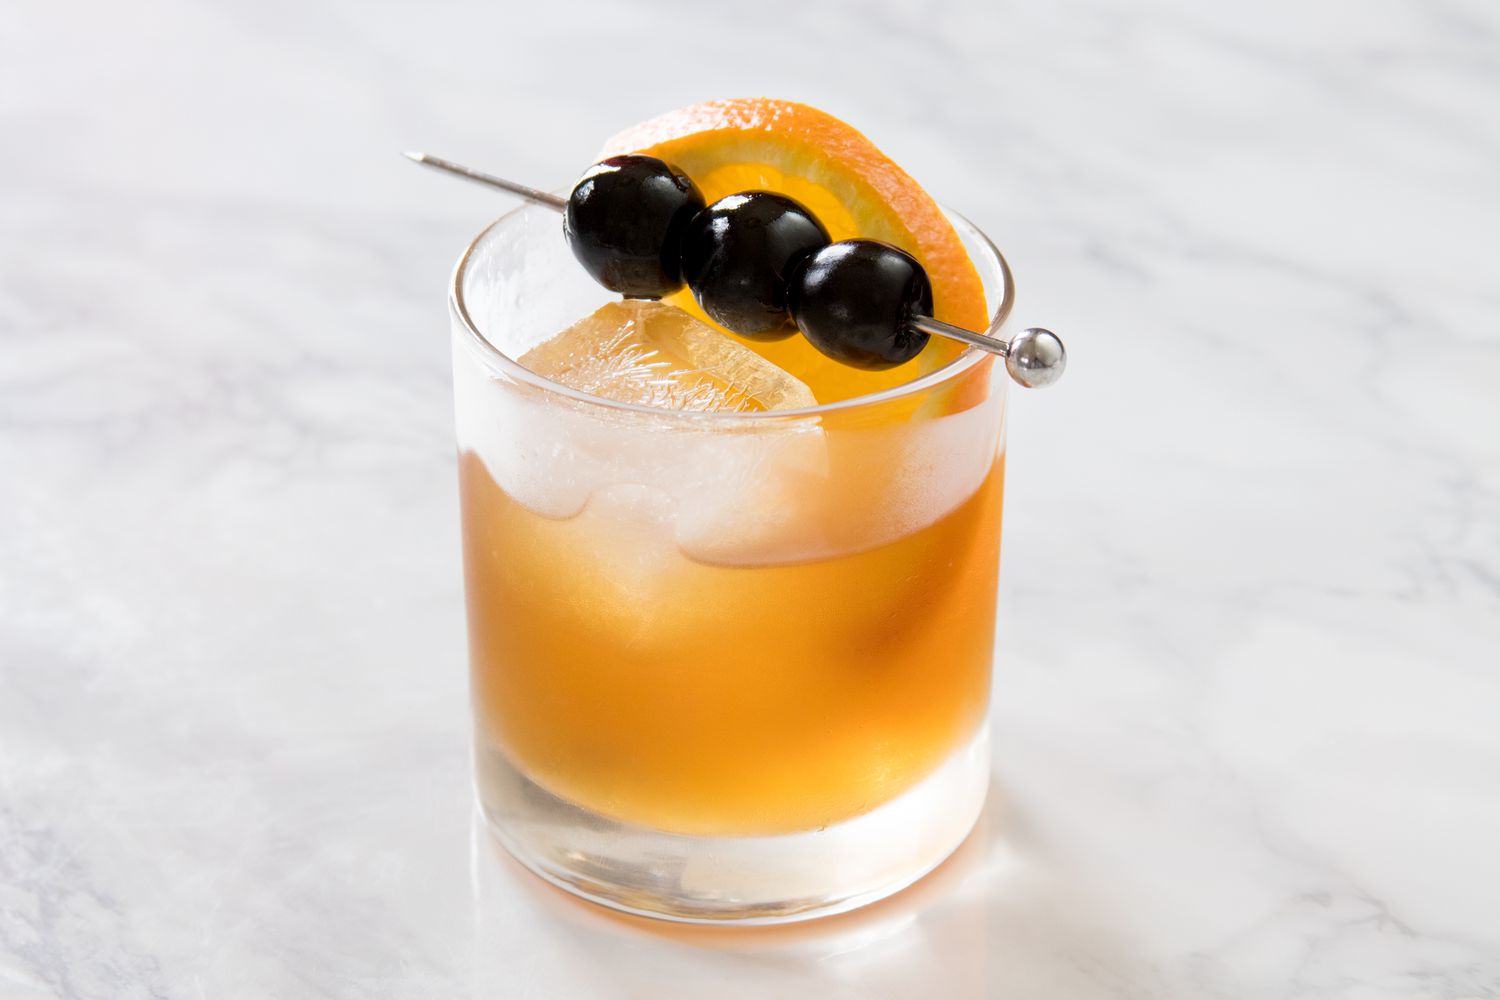 Amaretto sour garnished with an orange slice and real maraschino cherries